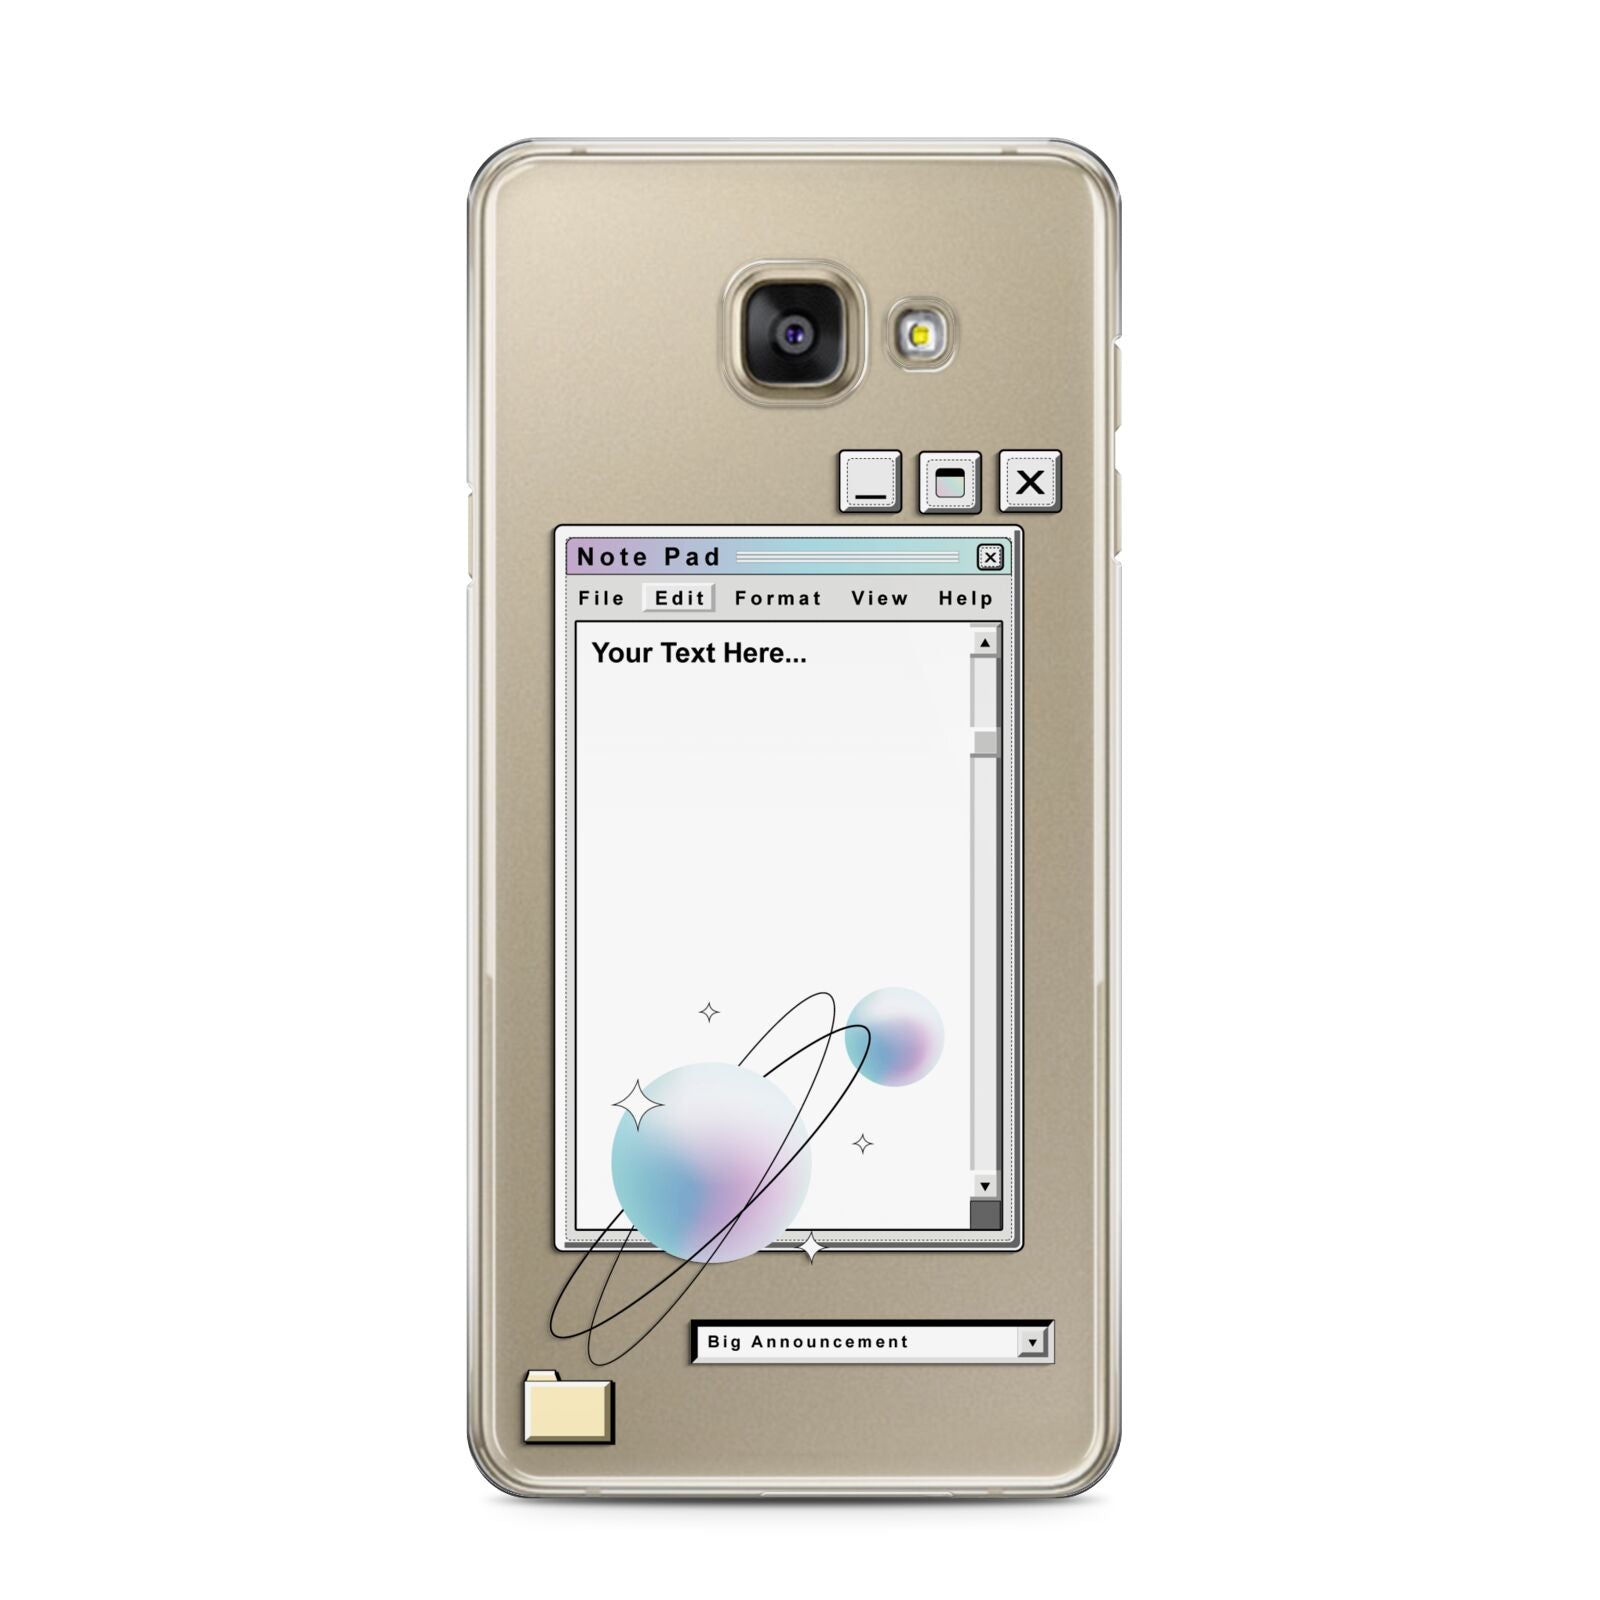 Retro Note Pad Samsung Galaxy A3 2016 Case on gold phone